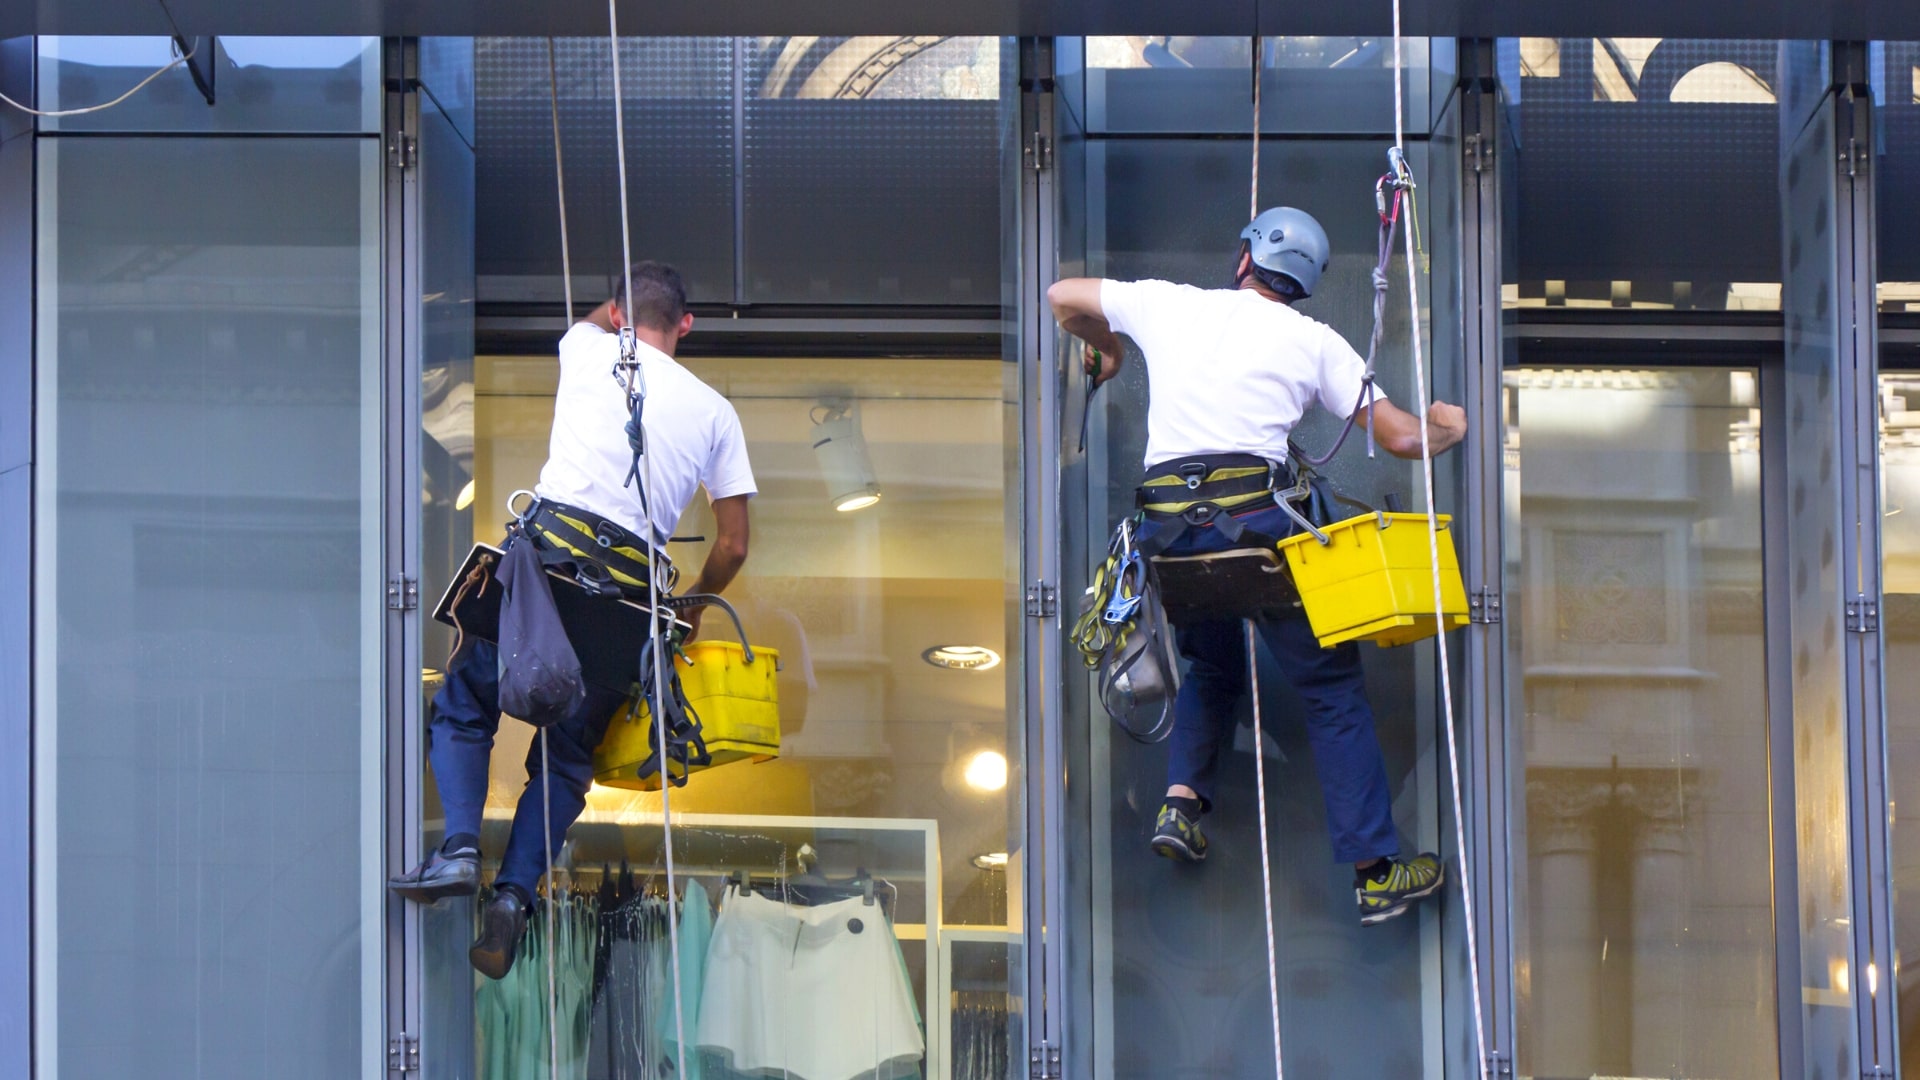 Building Cleaning Service in Dubai: Types and Cost